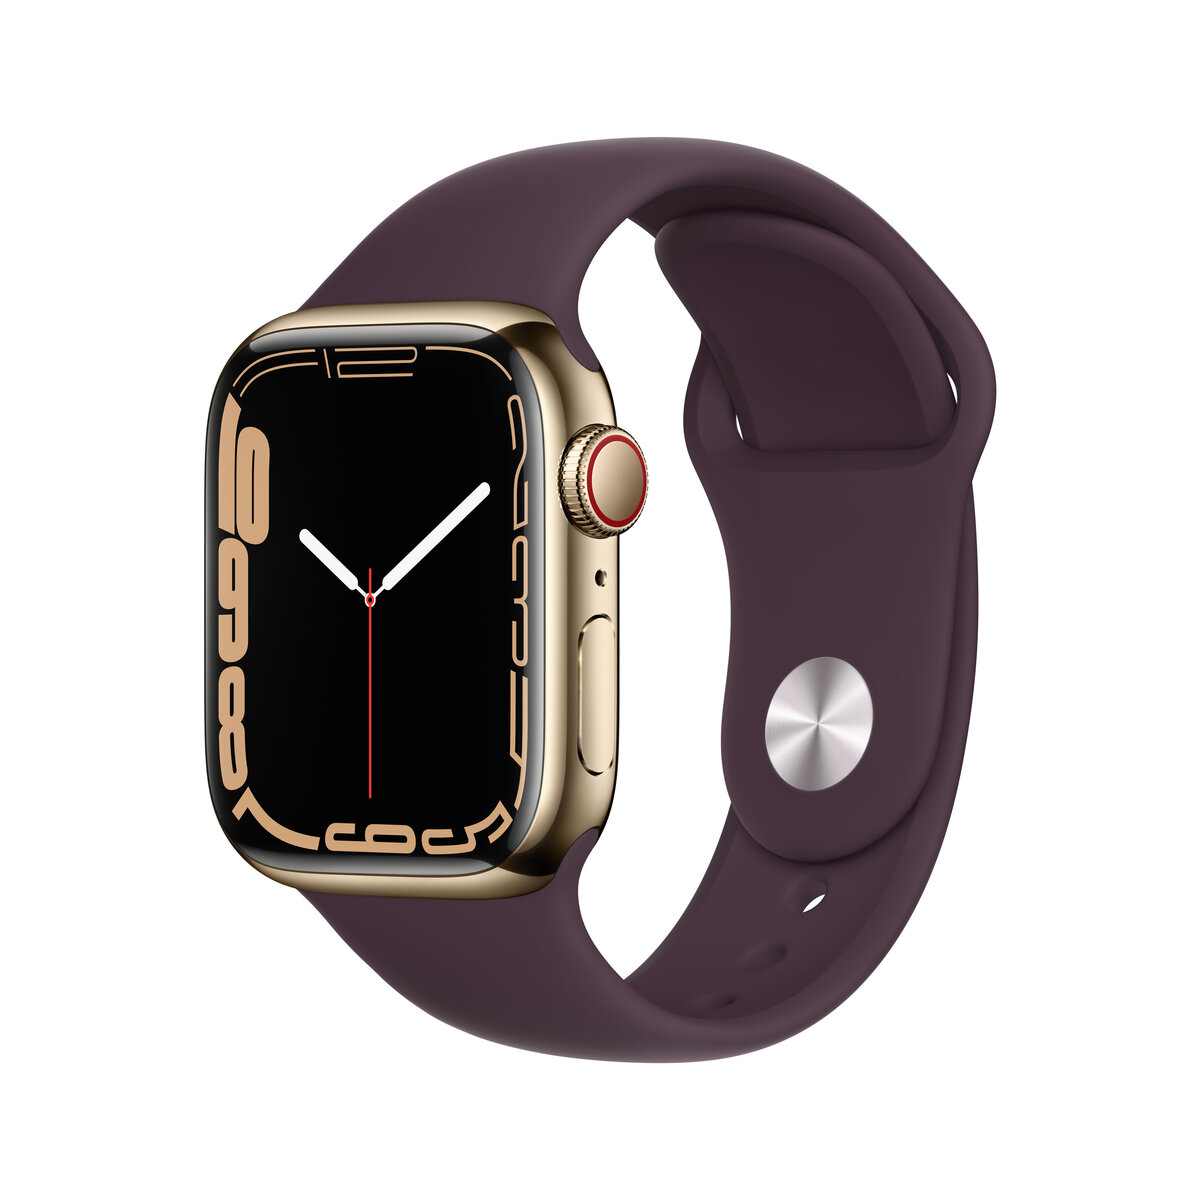 Buy Apple Watch Series 7 GPS + Cellular, 45mm Gold Stainless Steel Case with Dark Cherry Sport Band, MKJX3B/A at costco.co.uk